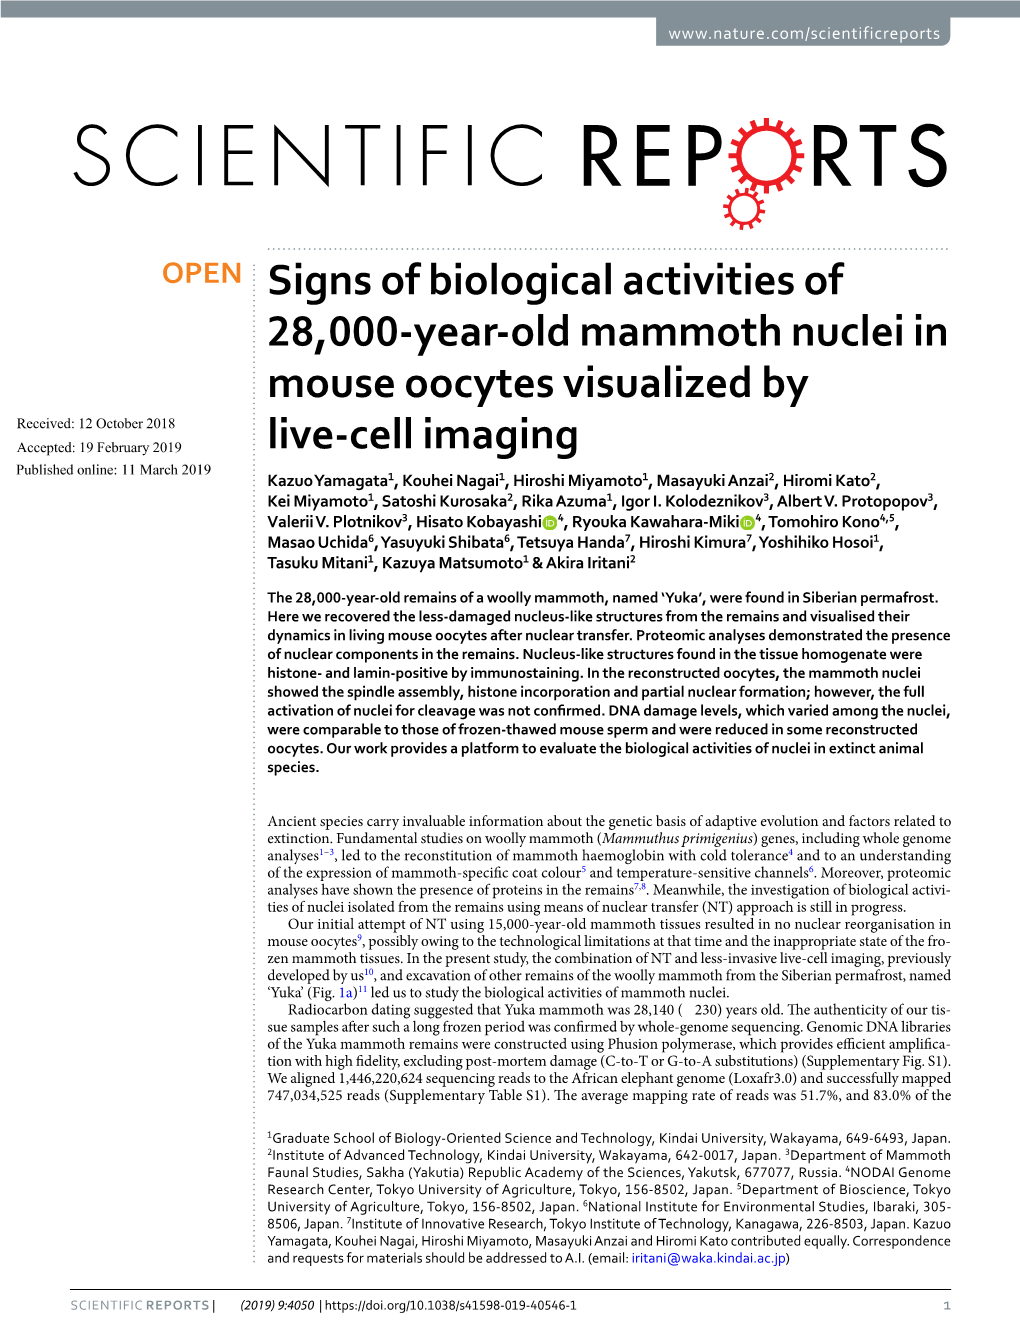 Signs of Biological Activities of 28,000-Year-Old Mammoth Nuclei in Mouse Oocytes Visualized by Live-Cell Imaging